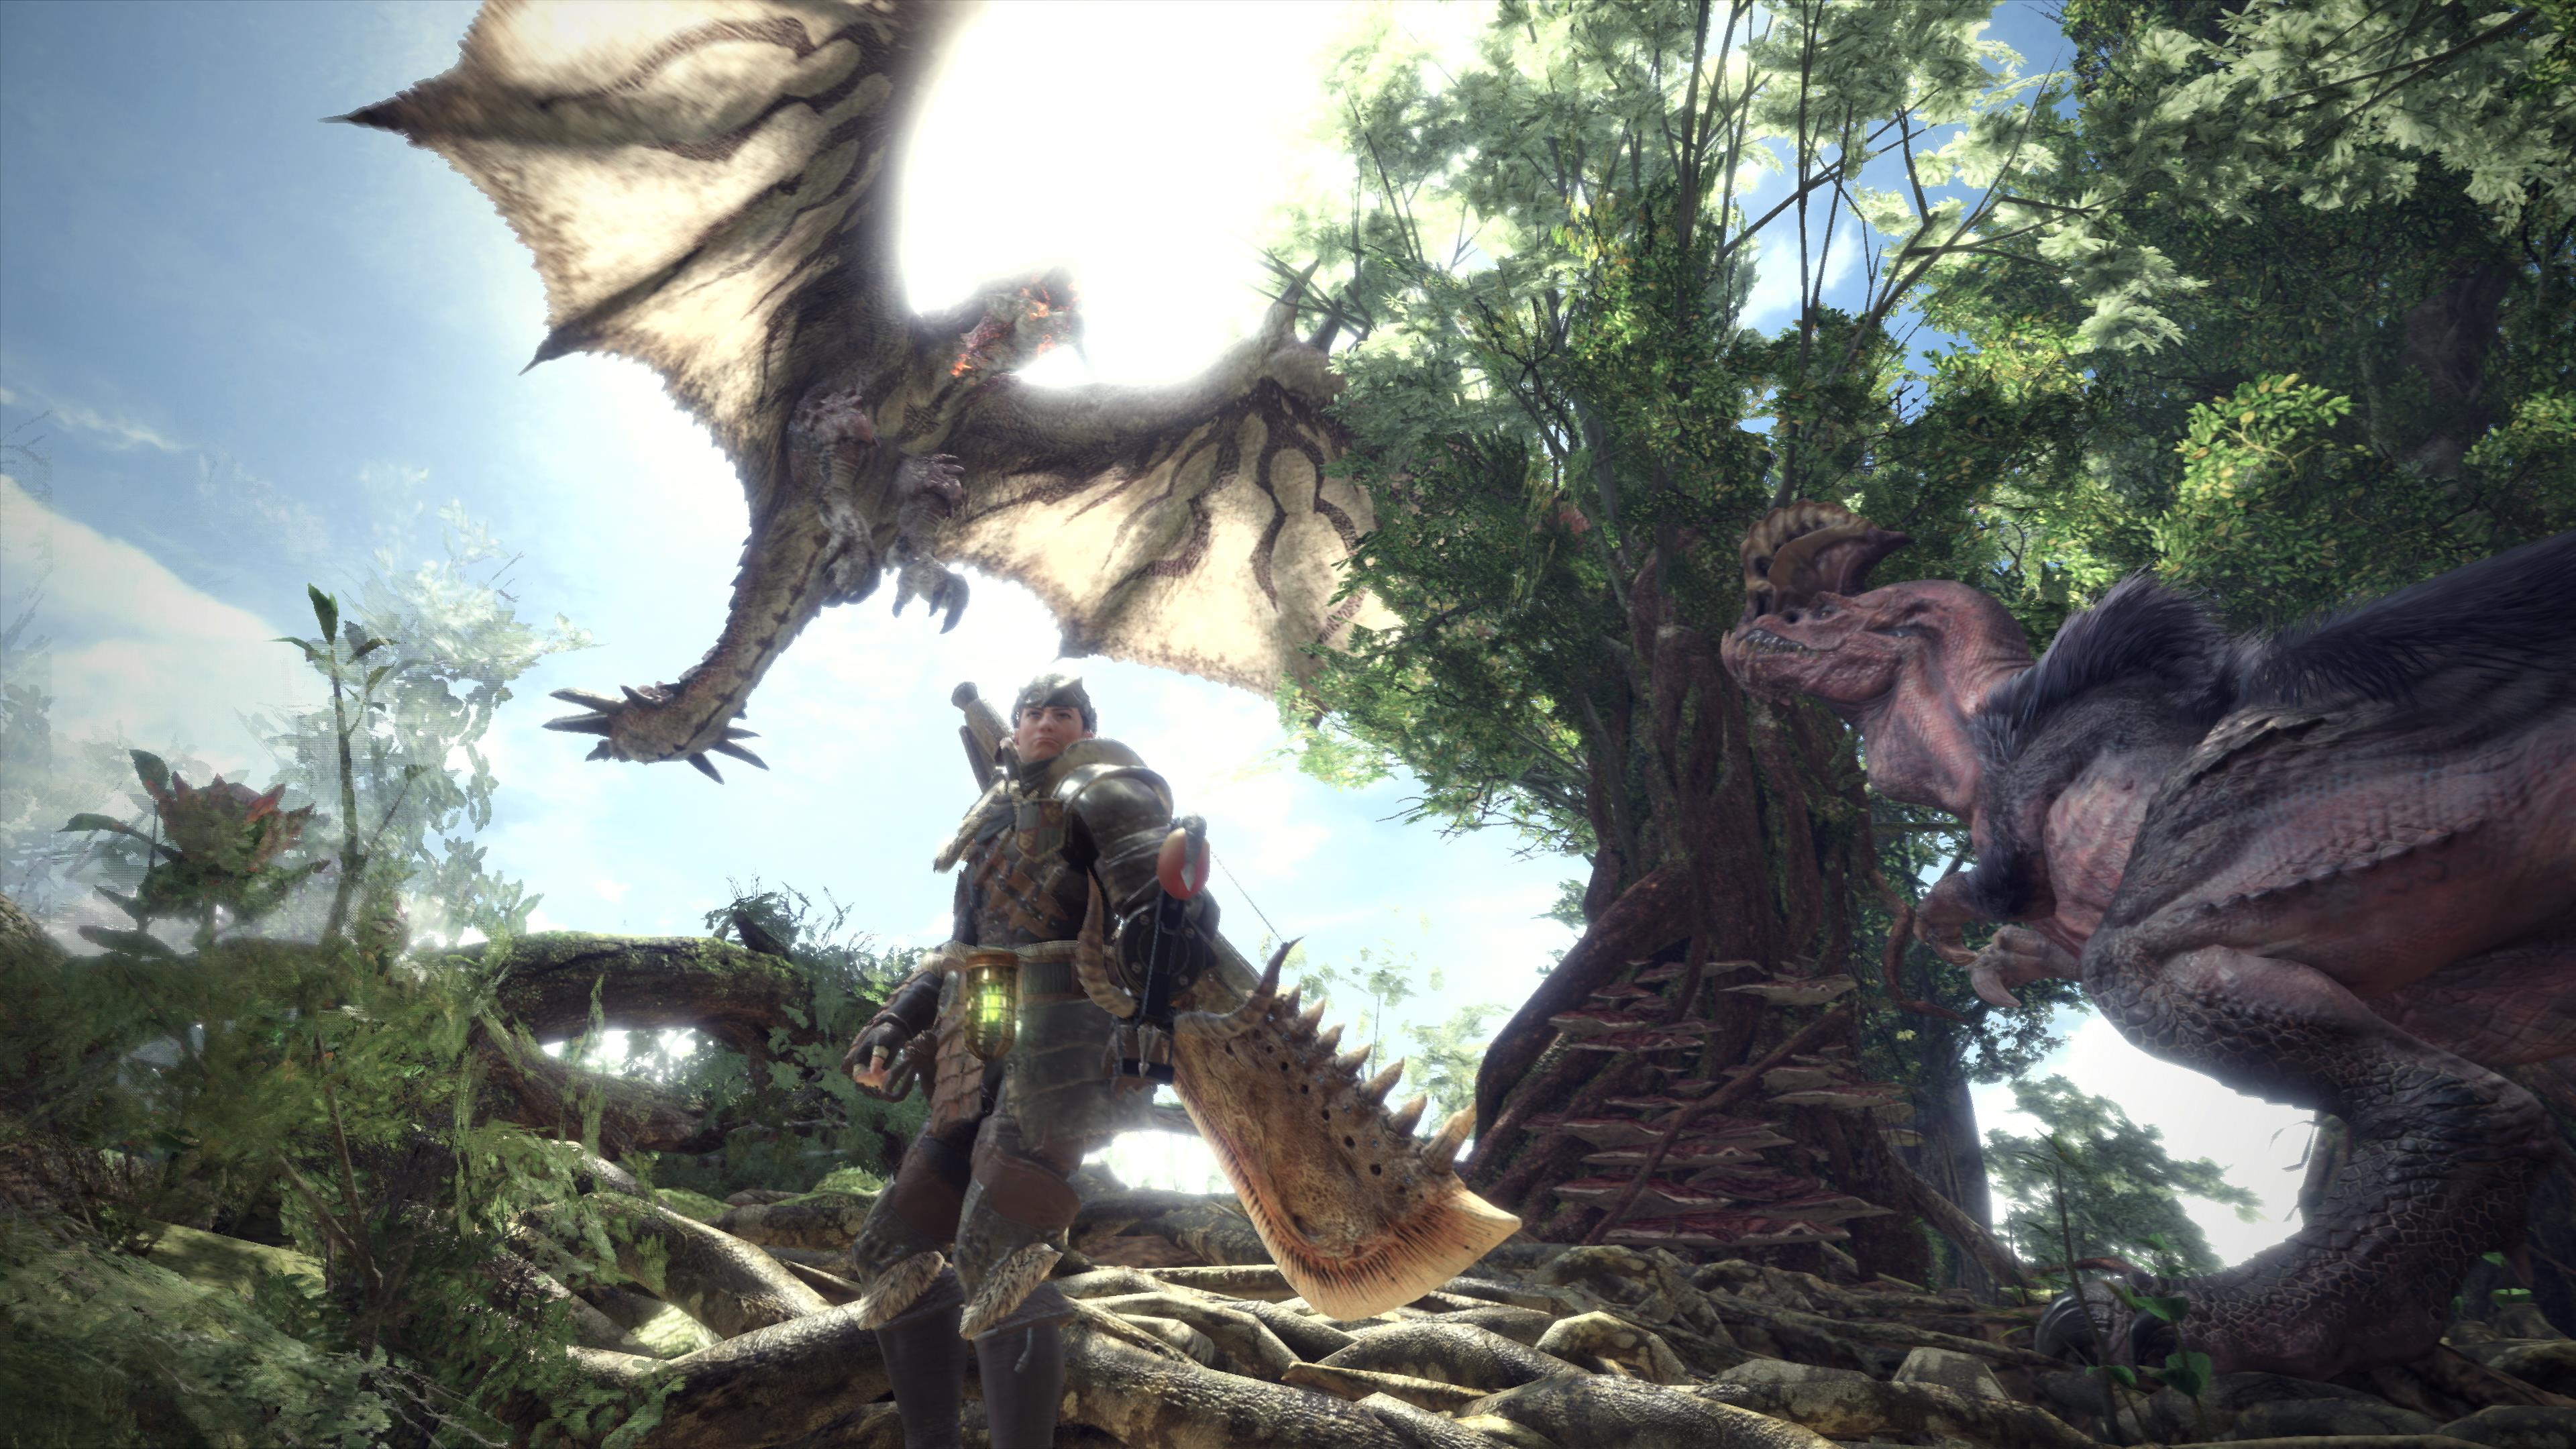 dyb Forbandet seng Monster Hunter World doesn't run great on any console - report | VG247